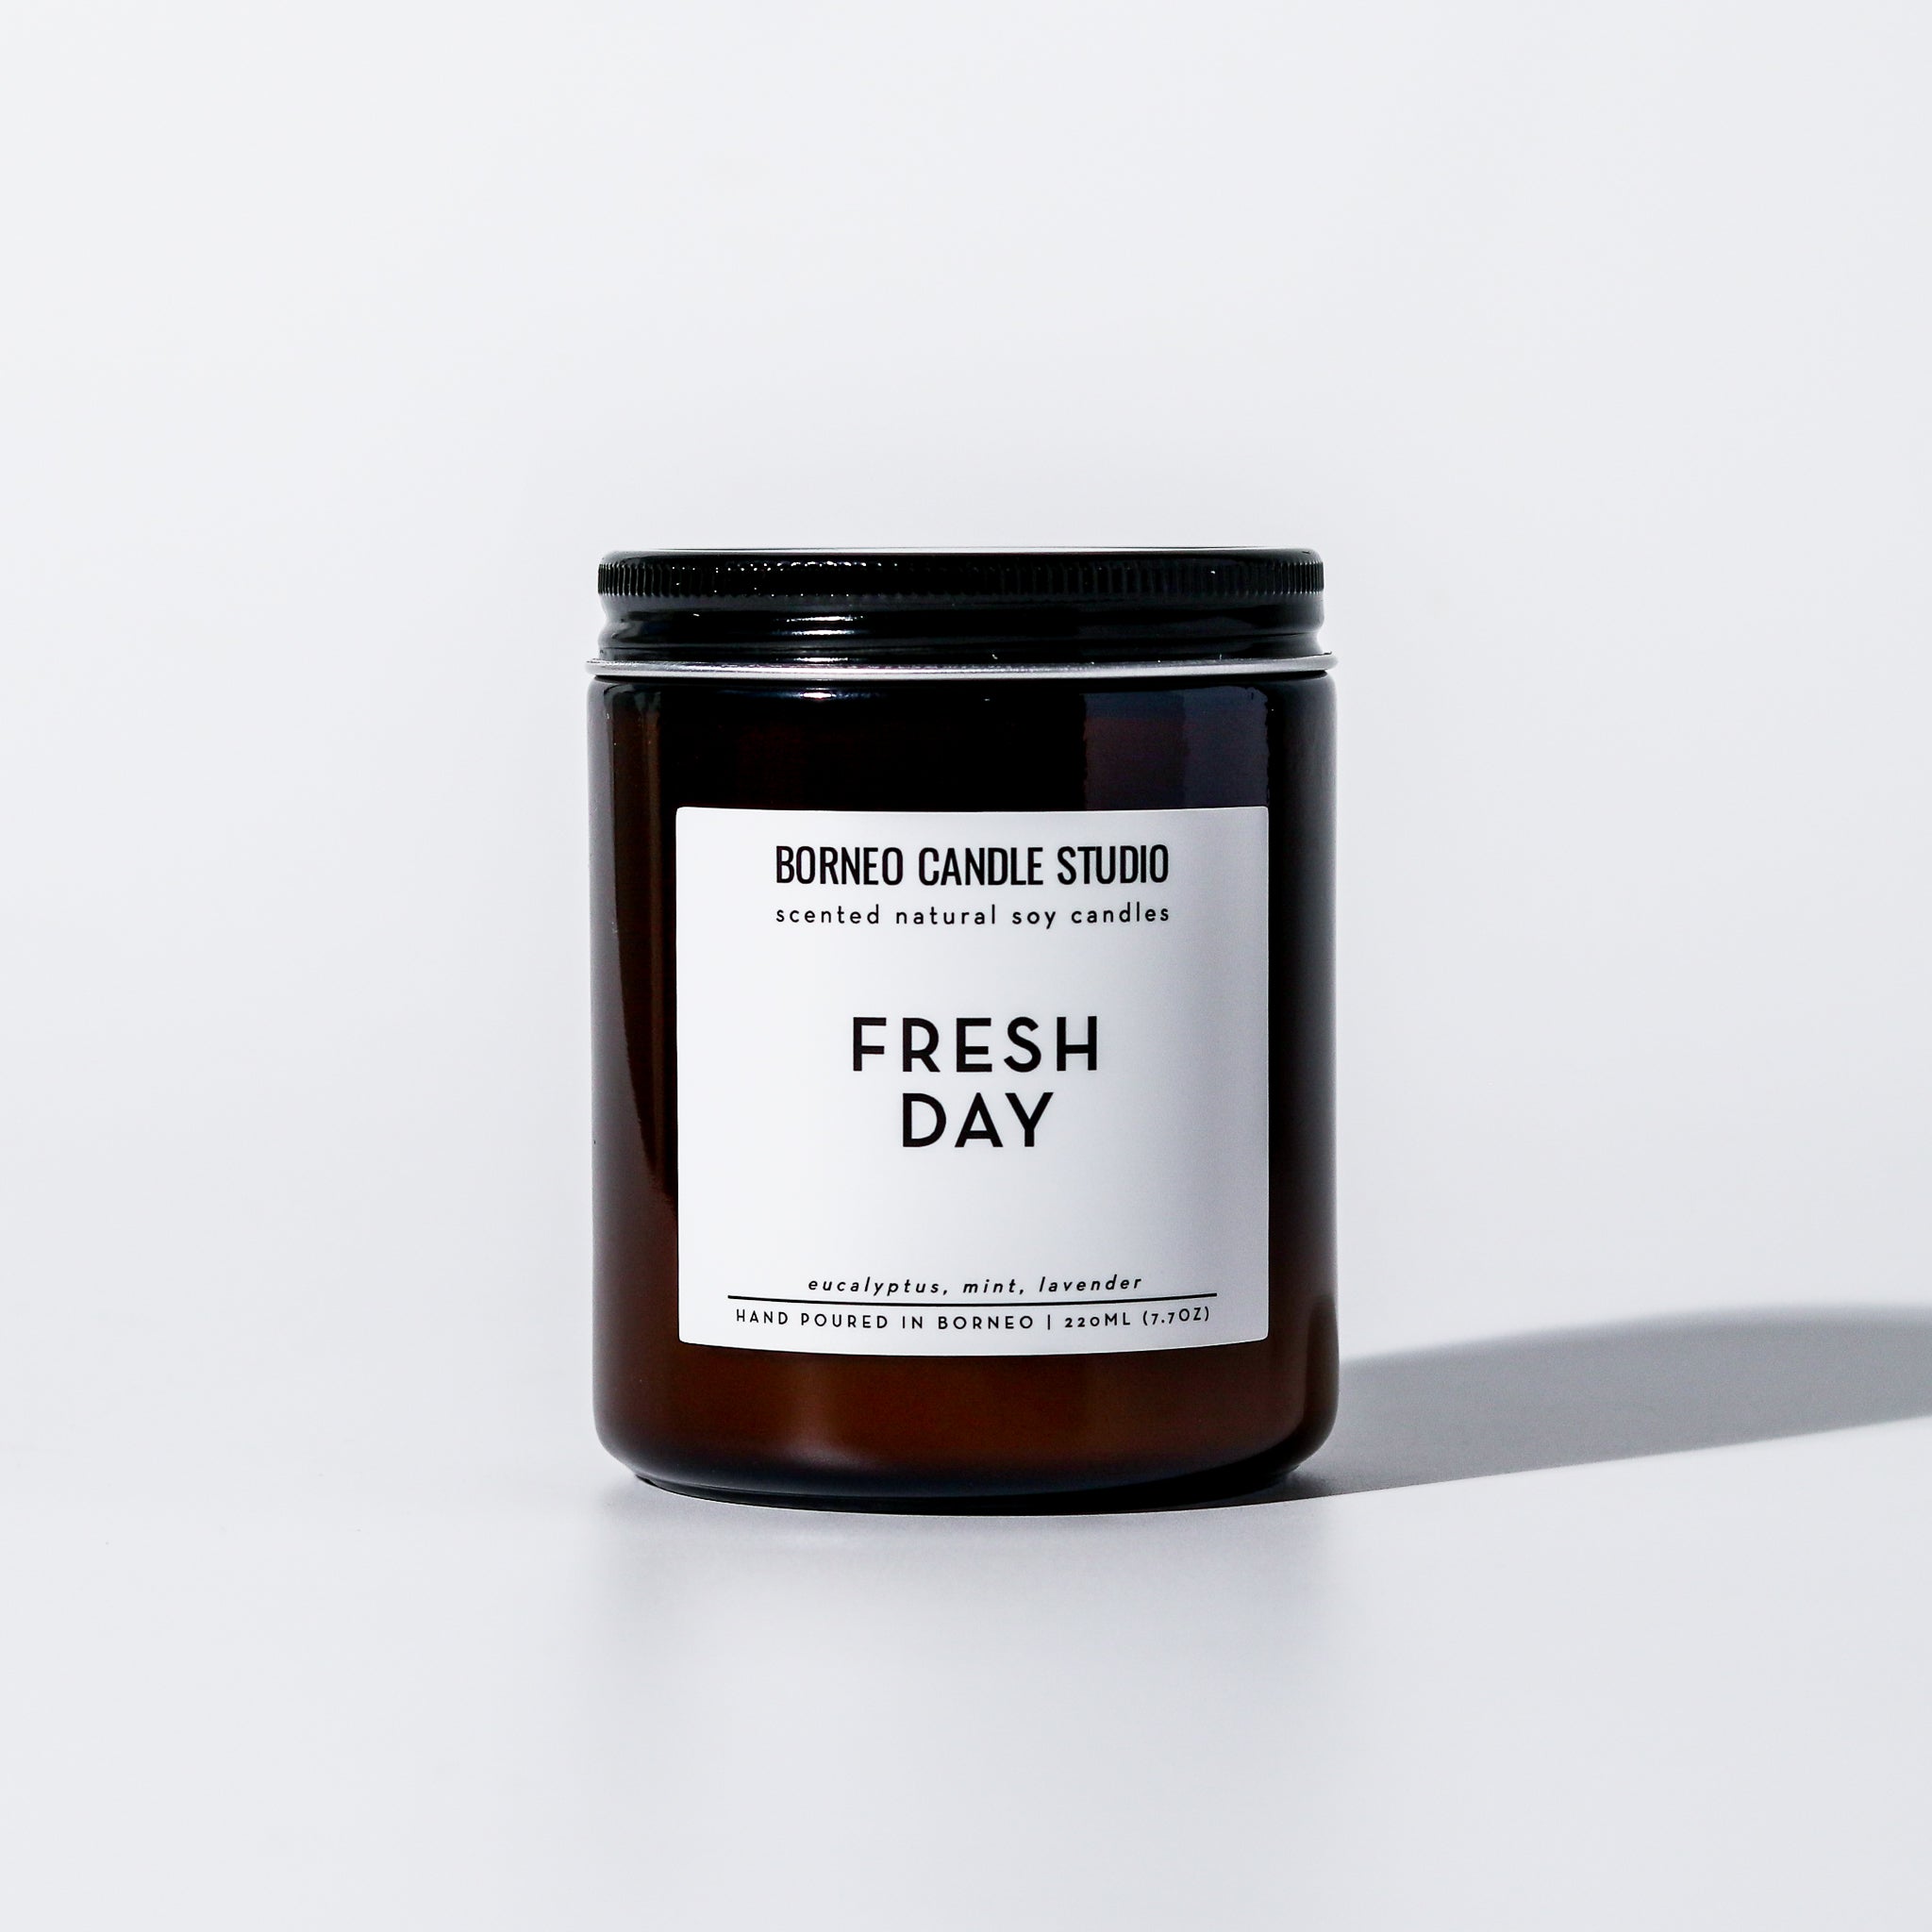 Fresh Day Scented Candle - eucalyptus, mint, lavender in 7.7 oz amber glass jar with lid